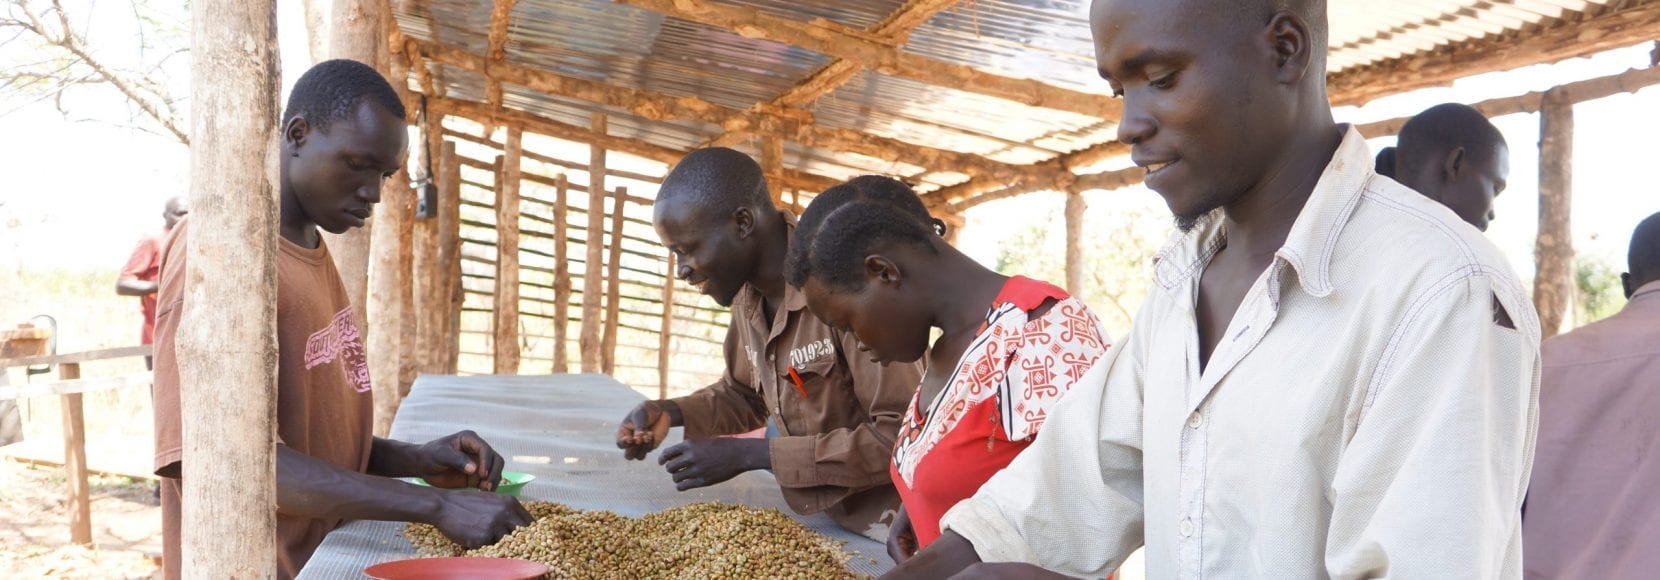 Group of people picking through coffee beans